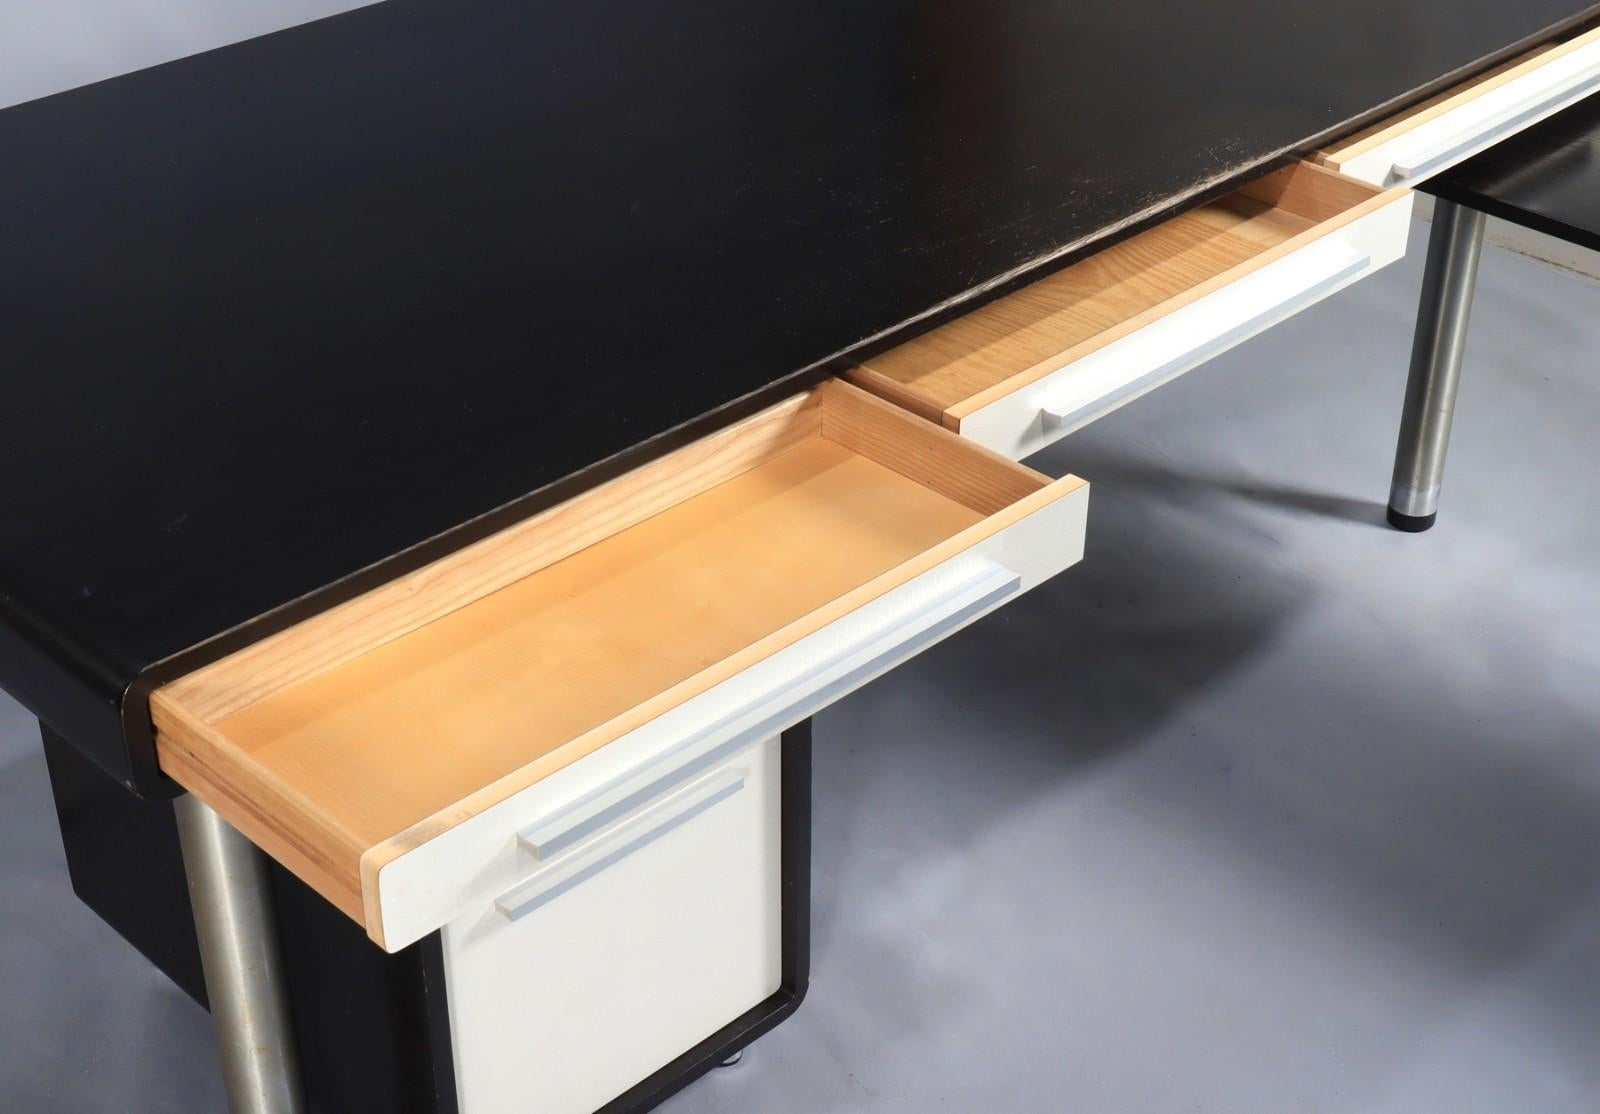 Steel Dyrlund Desk Model 'Space' With Side Table And Drawer Module For Sale